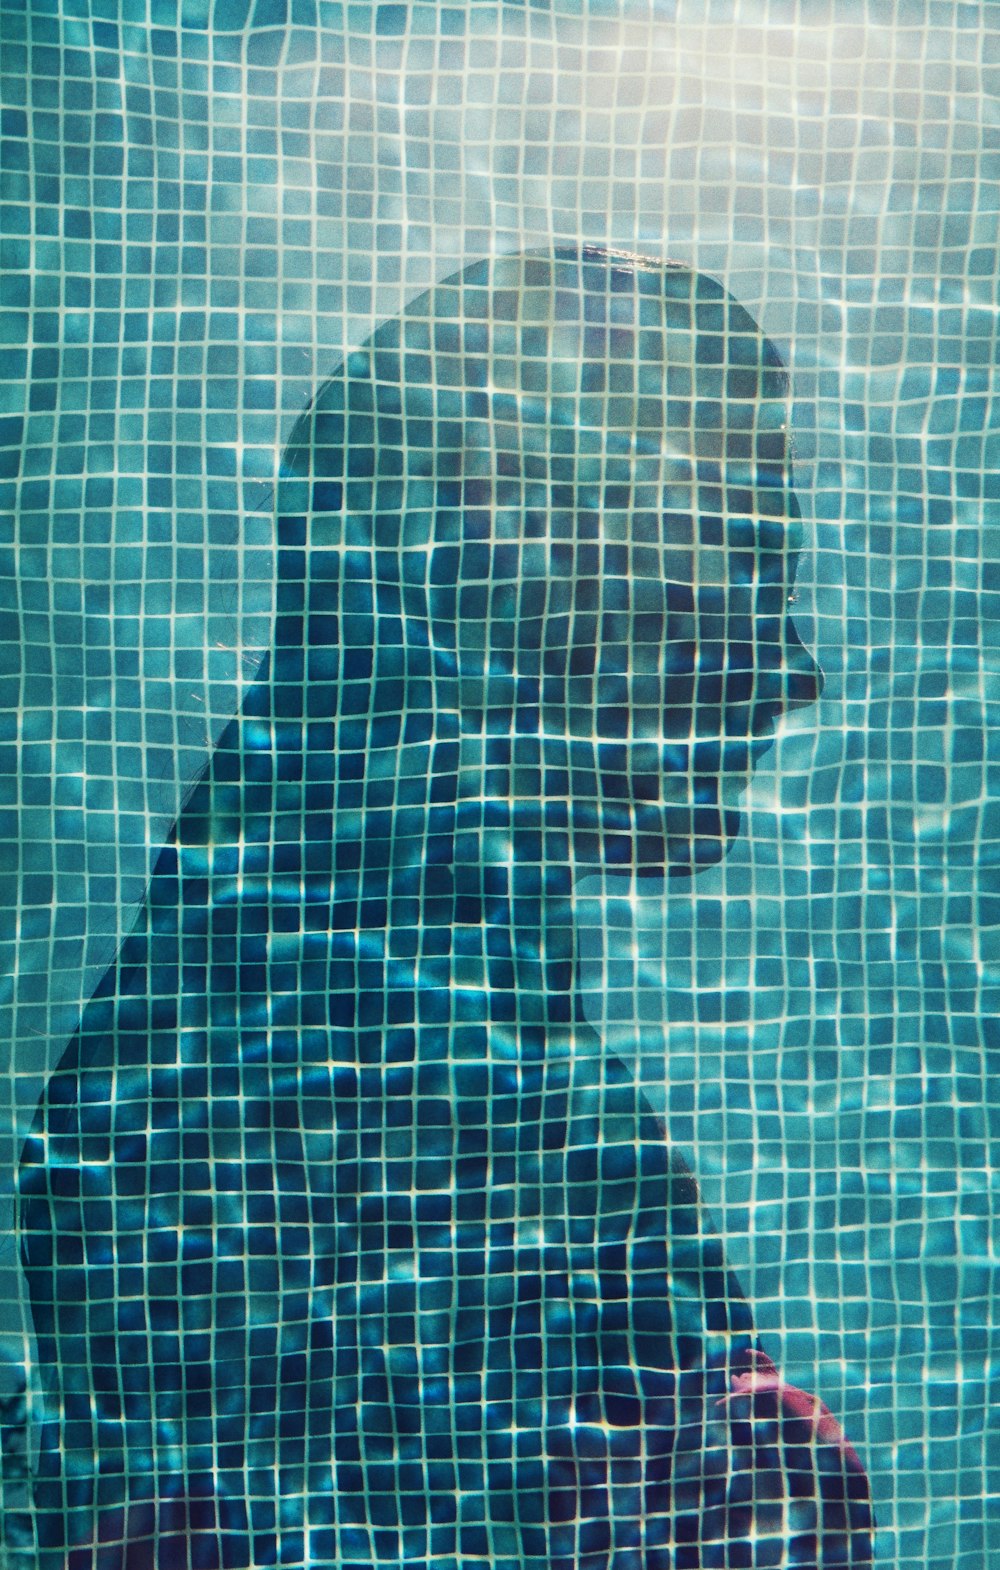 a reflection of a man in a swimming pool